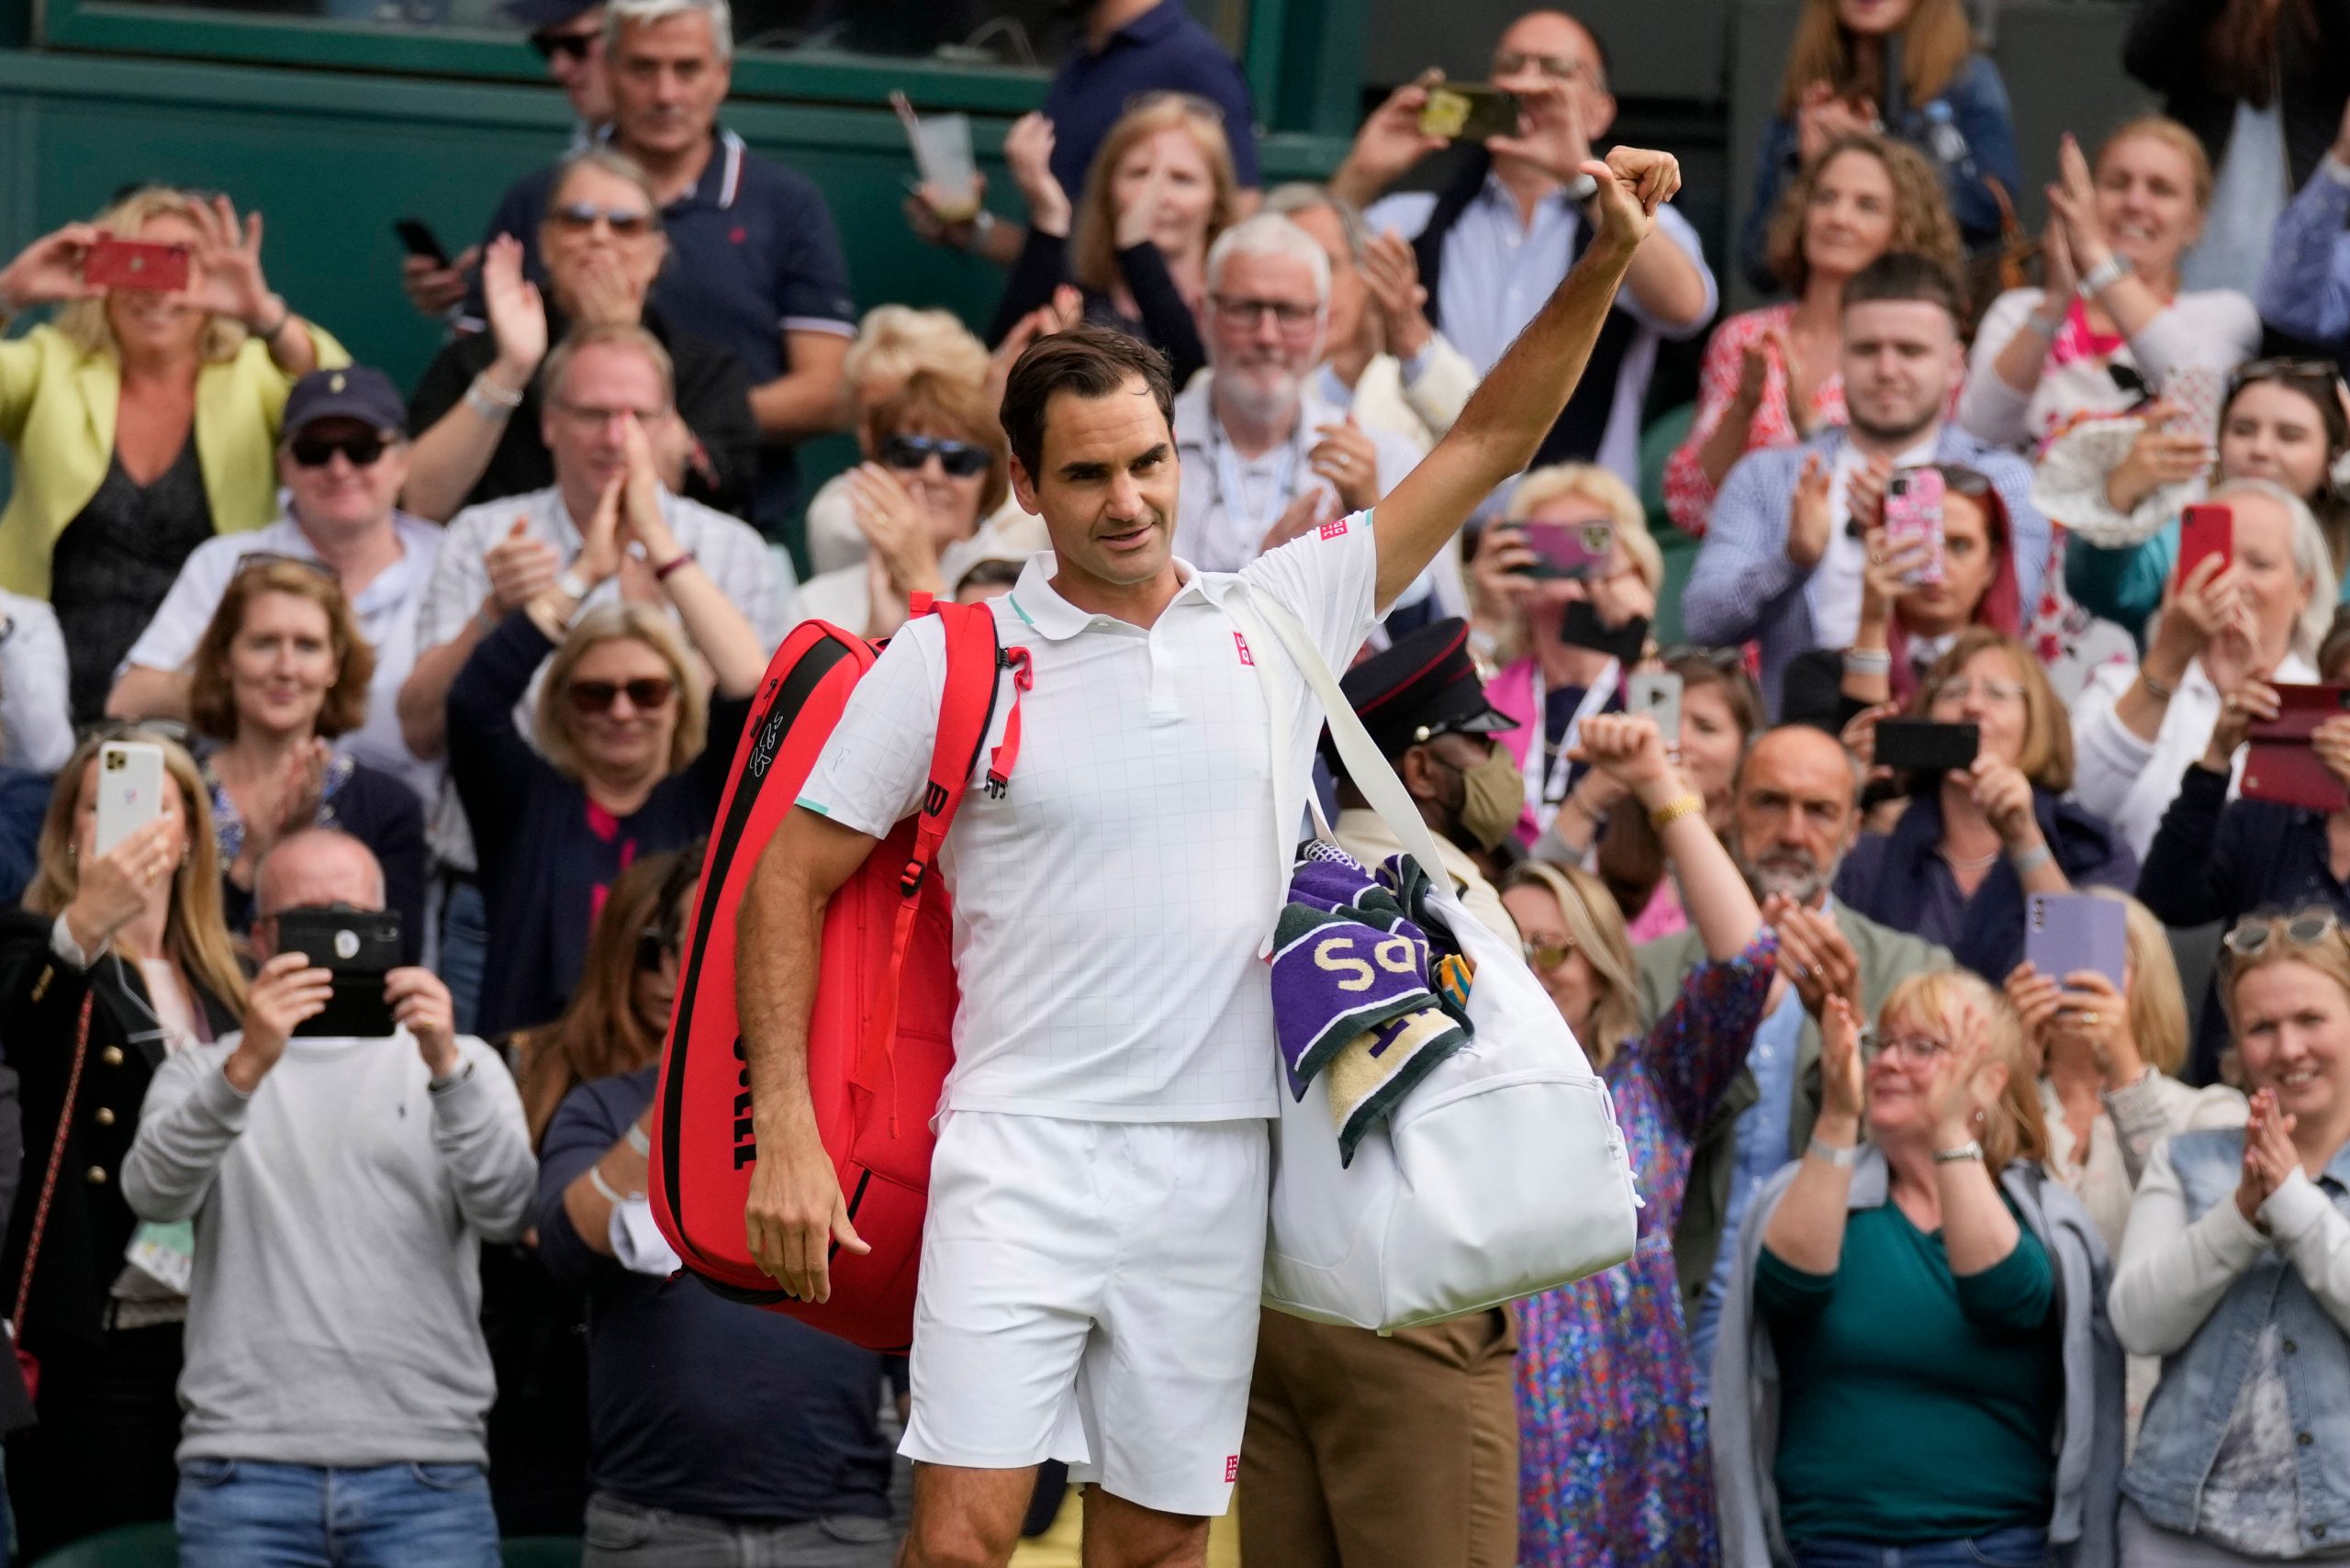 Roger Federer ousted from Wimbledon after loss in quarter-finals